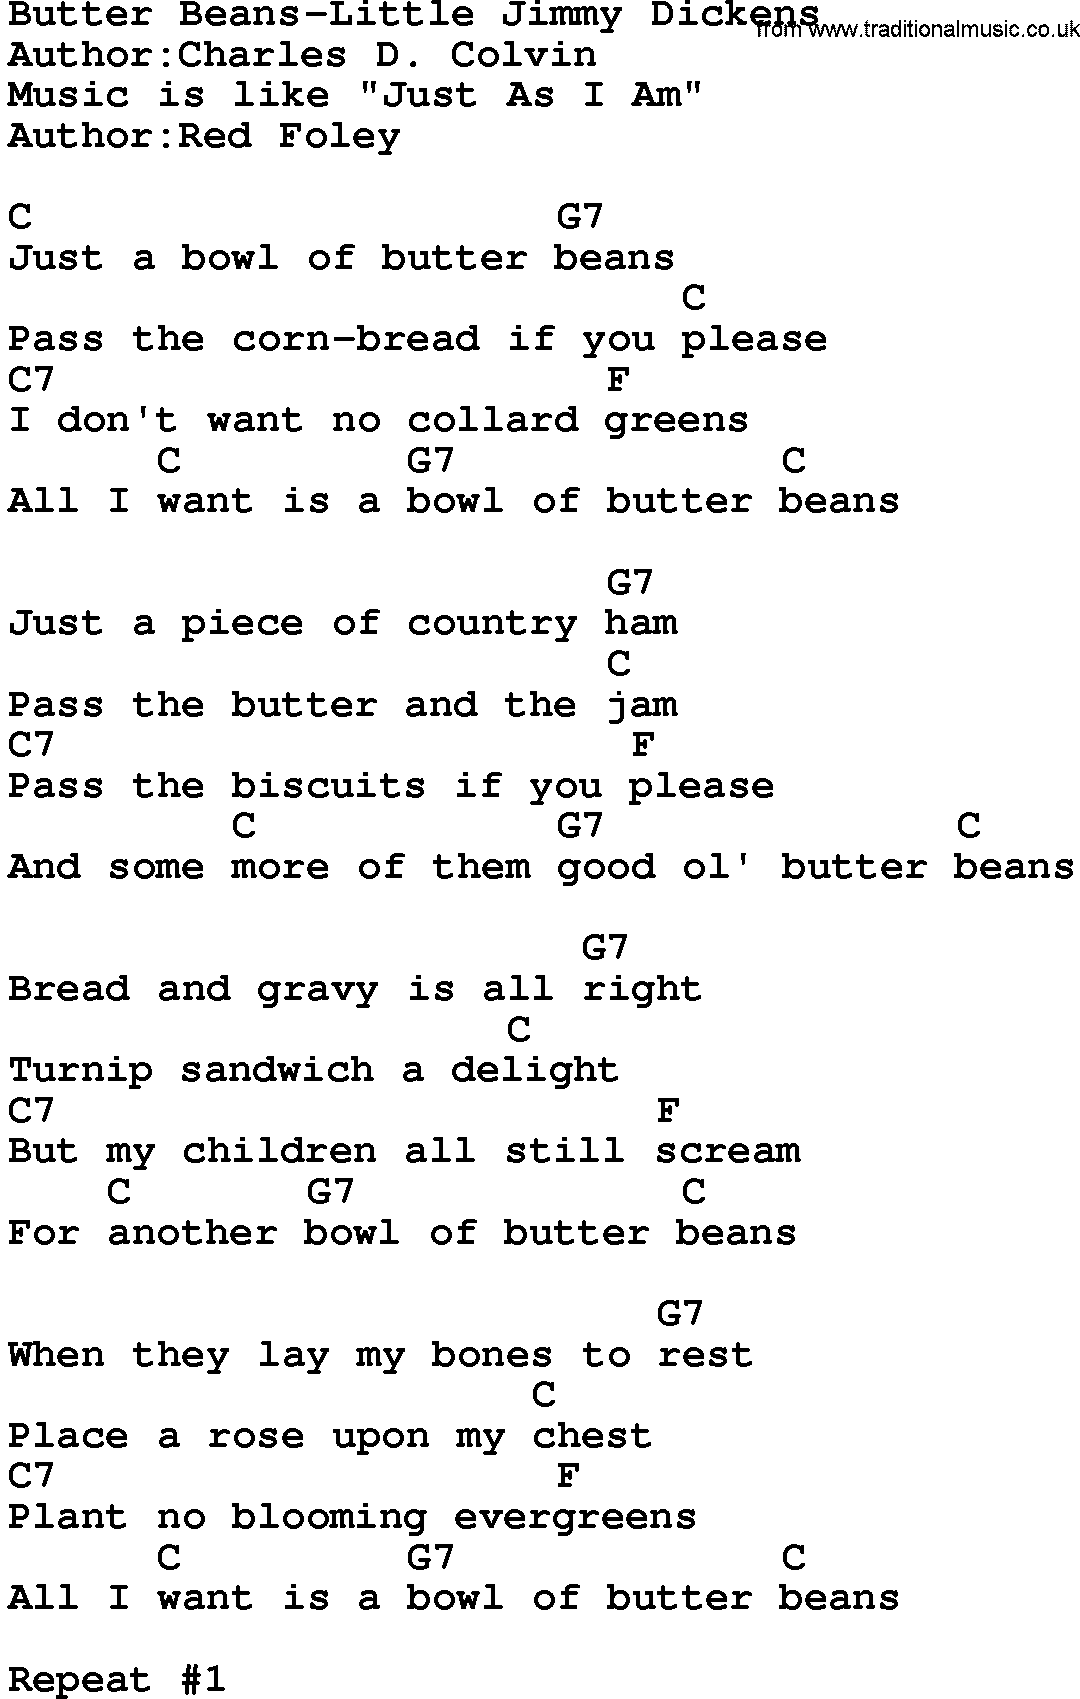 Country music song: Butter Beans-Little Jimmy Dickens lyrics and chords